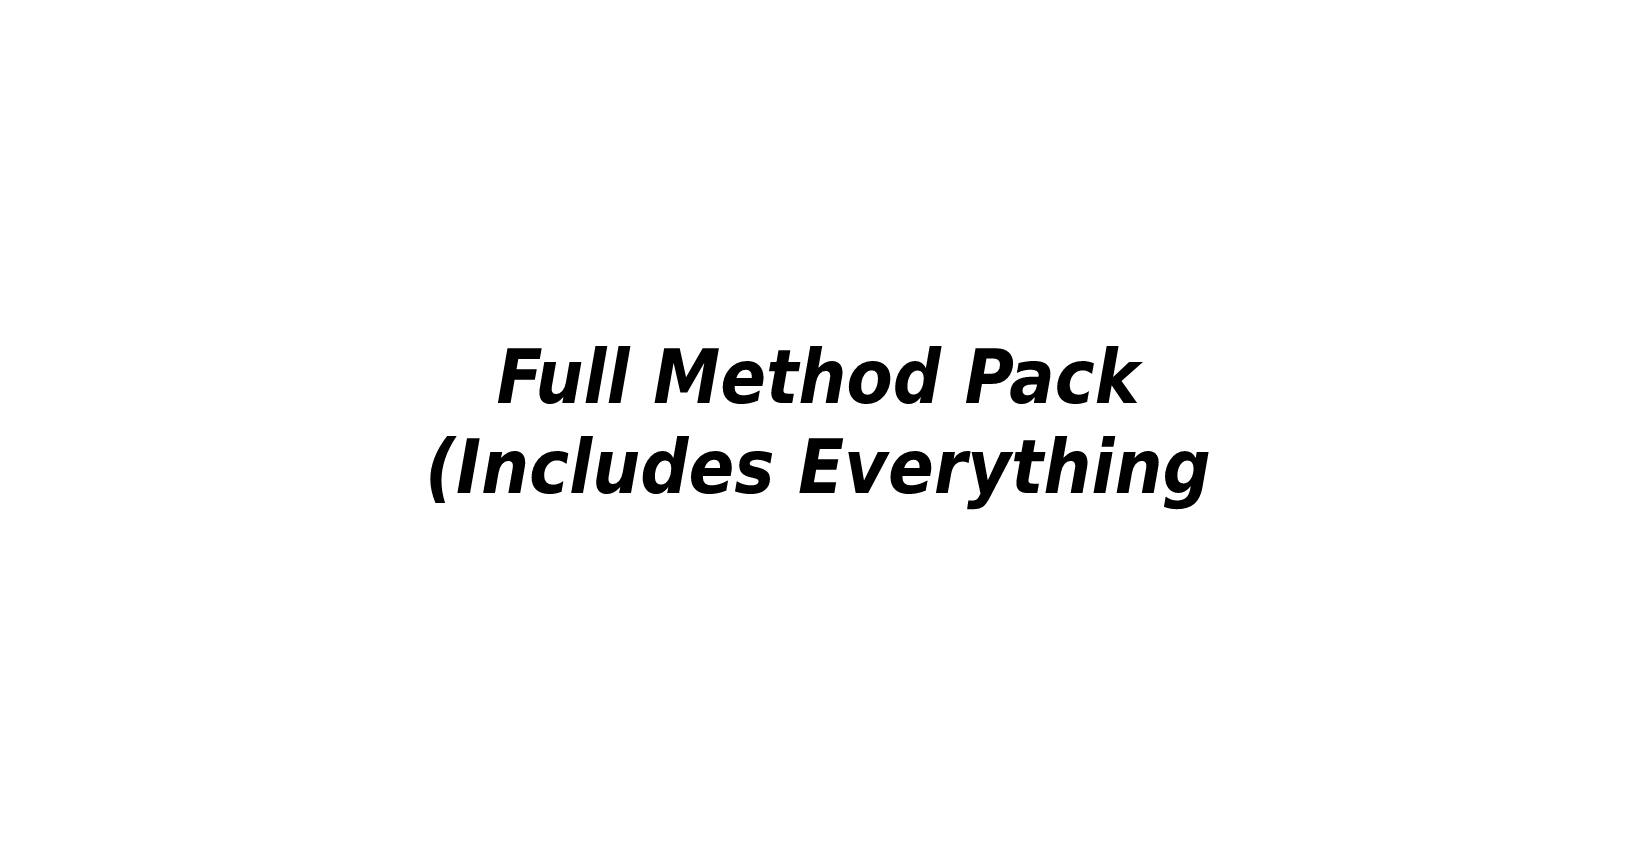 Full Method Pack (Includes Everything)